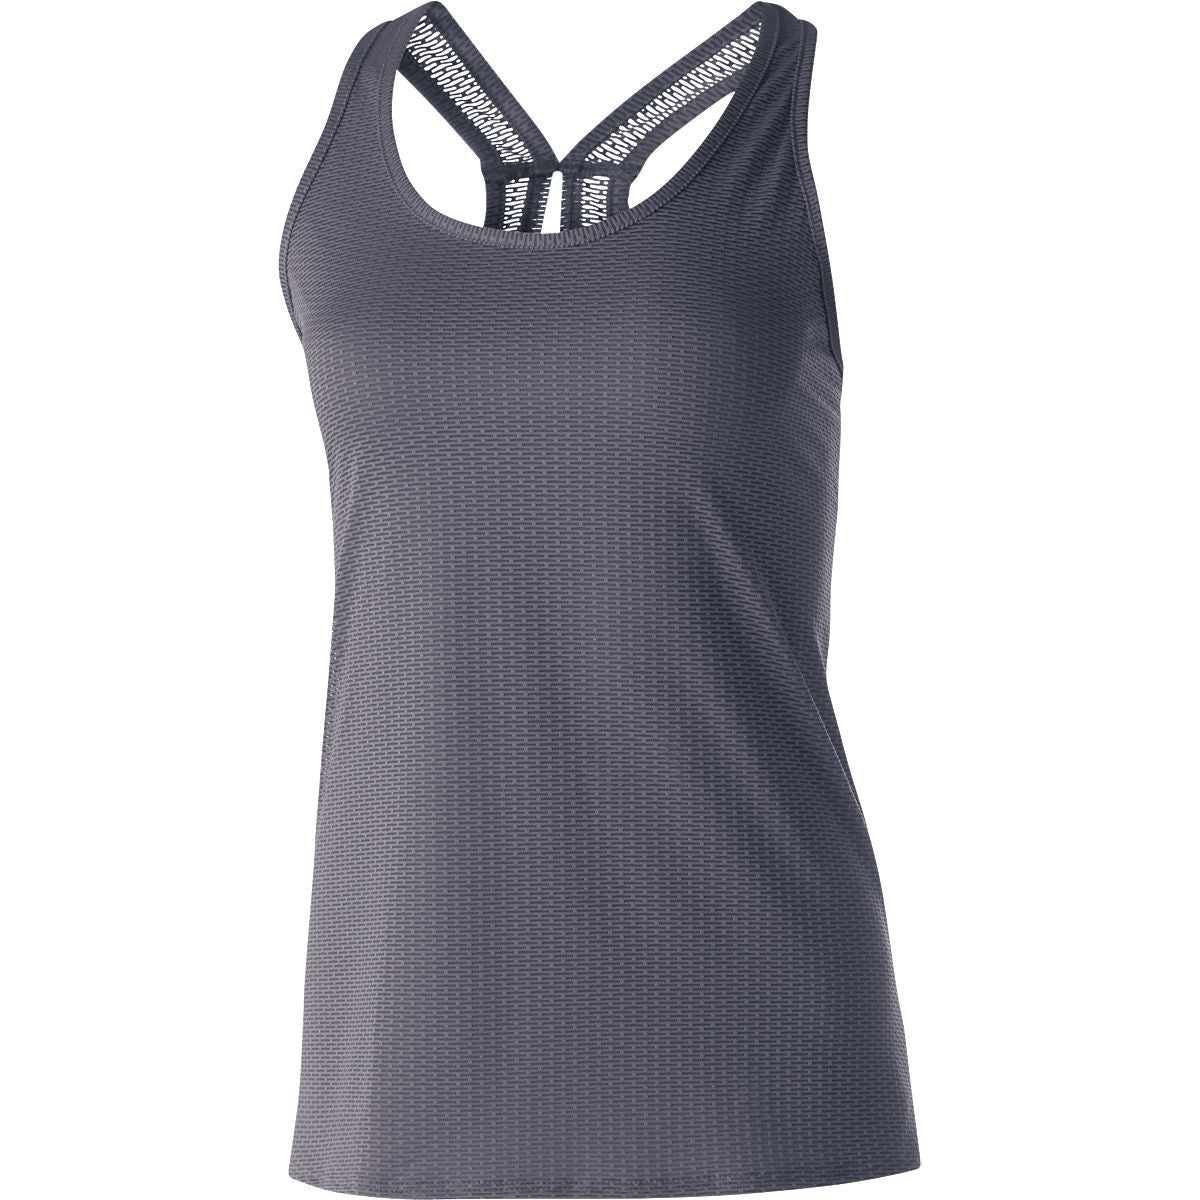 Holloway Ladies Precision Tank in Graphite  -Part of the Ladies, Ladies-Tank, Holloway, Shirts product lines at KanaleyCreations.com